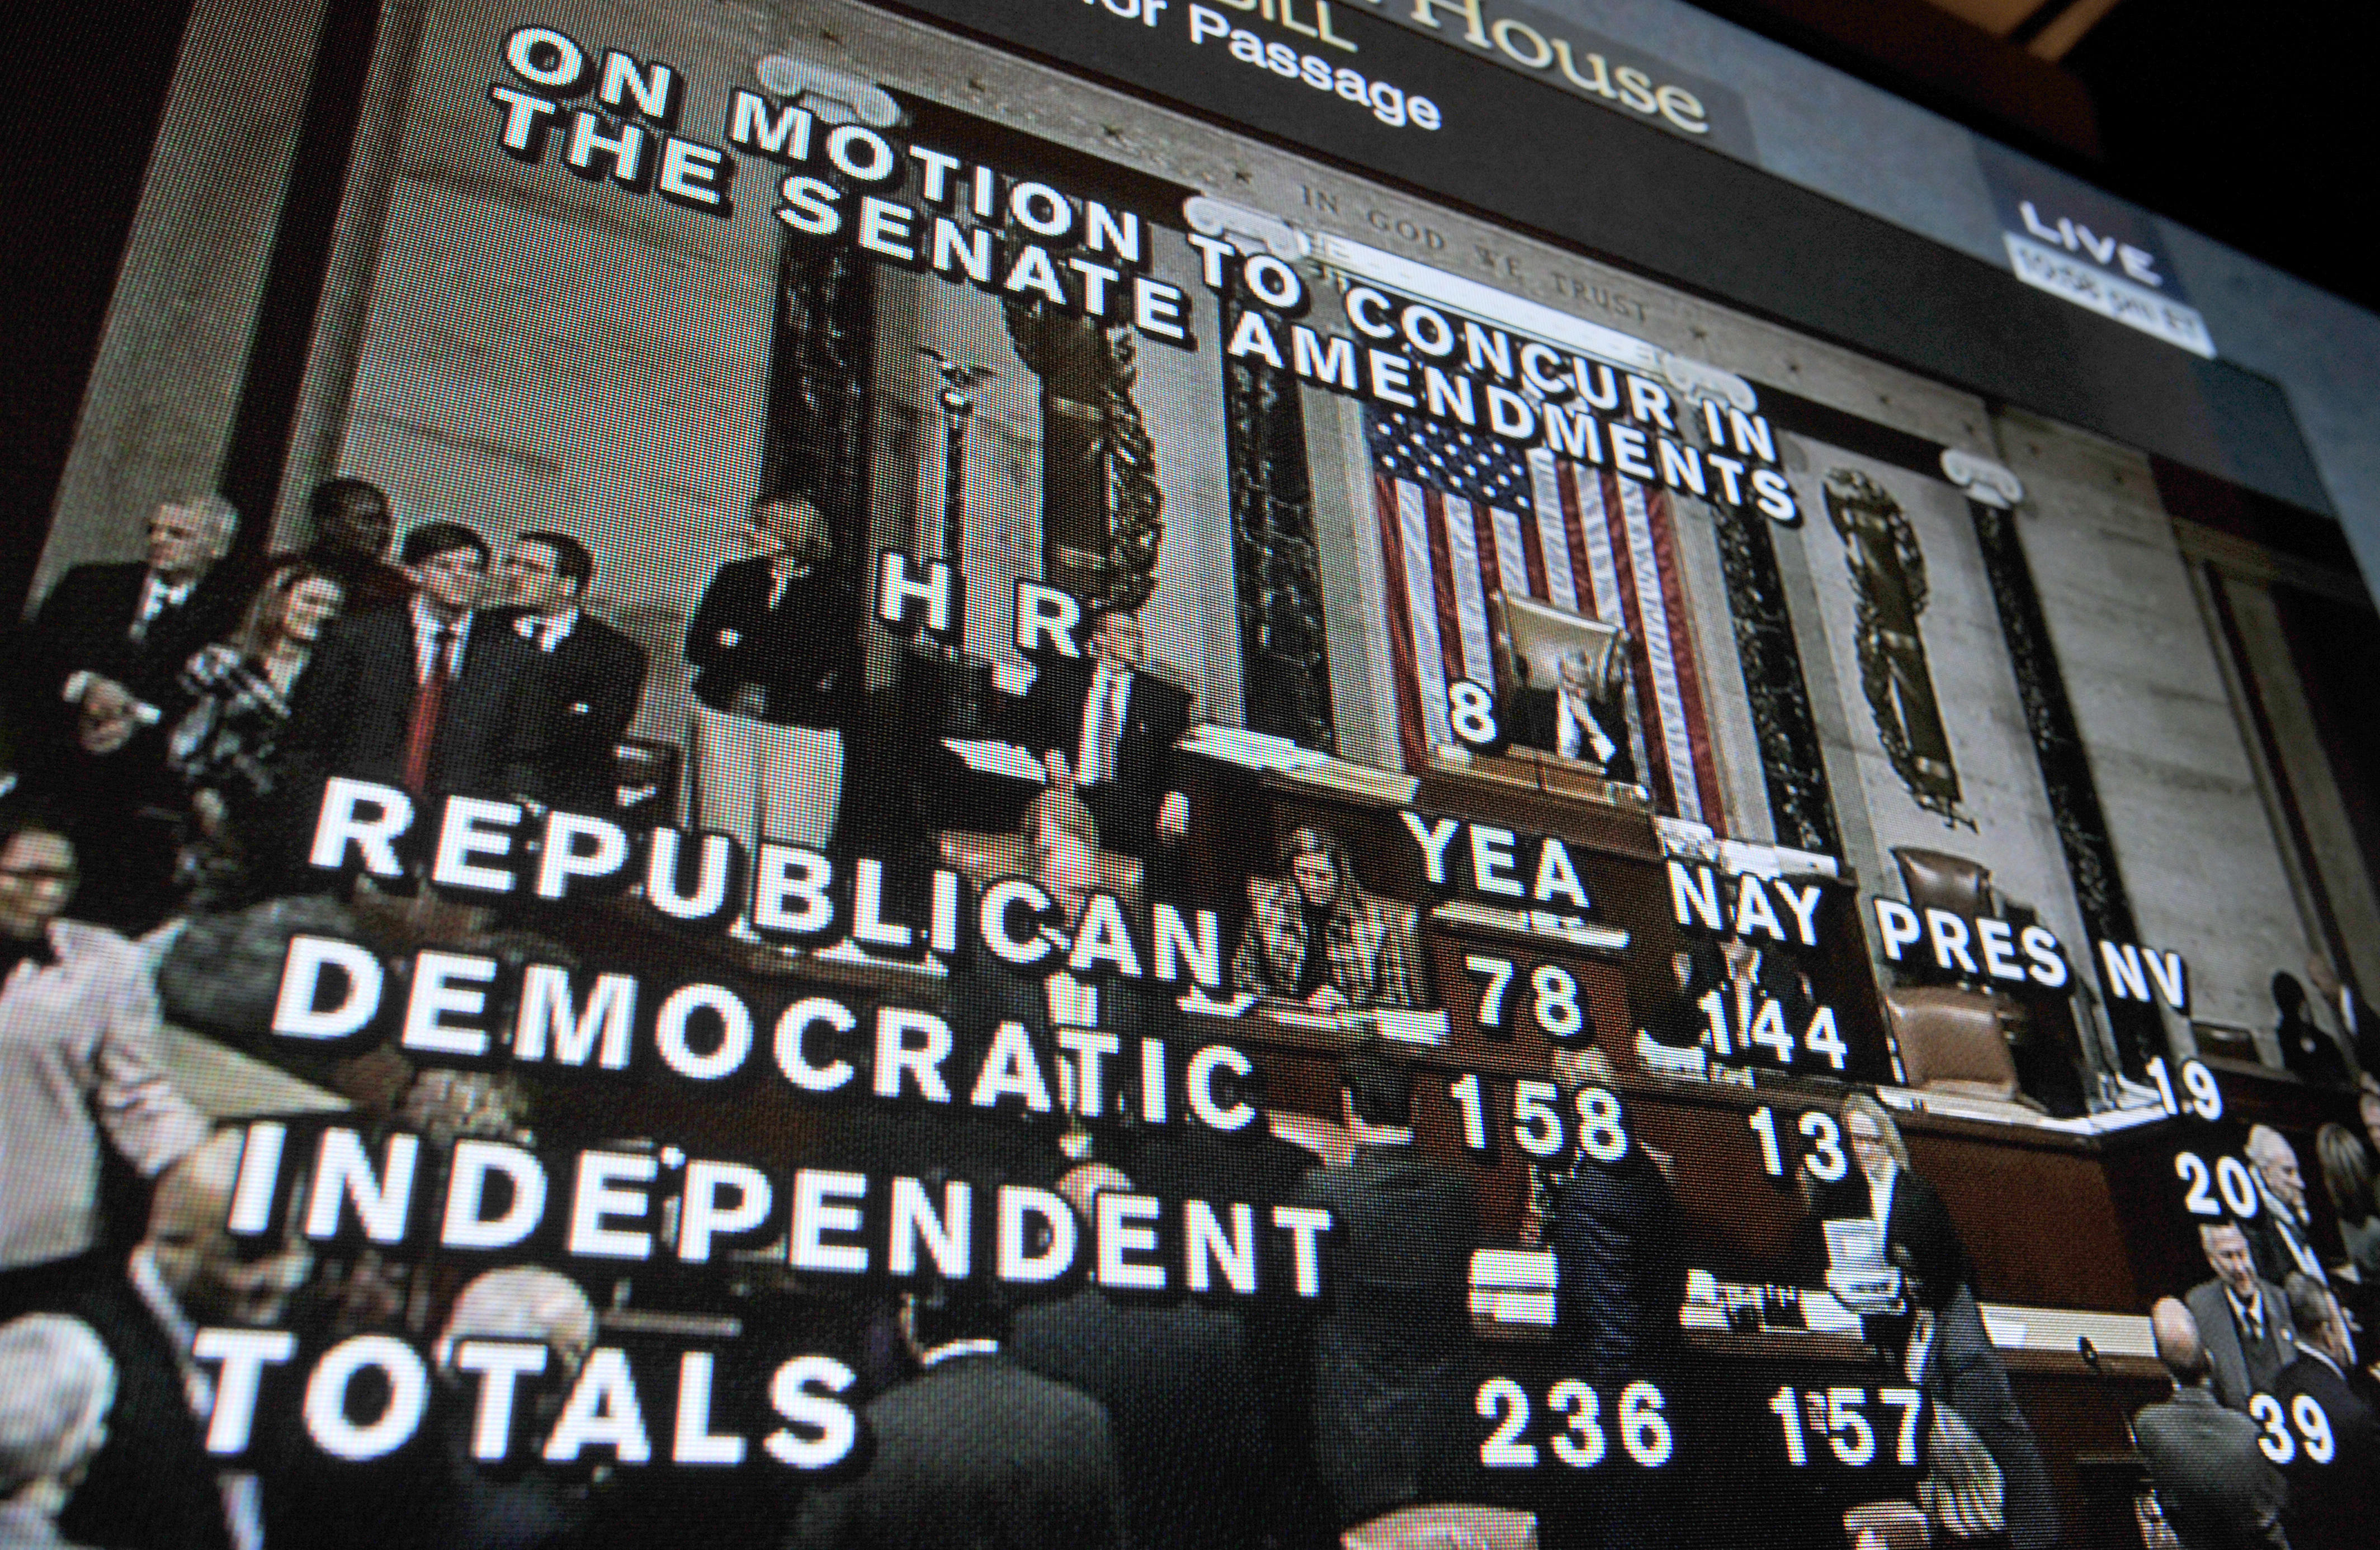 C-SPAN interrupted by Russian news site RT - CBS News